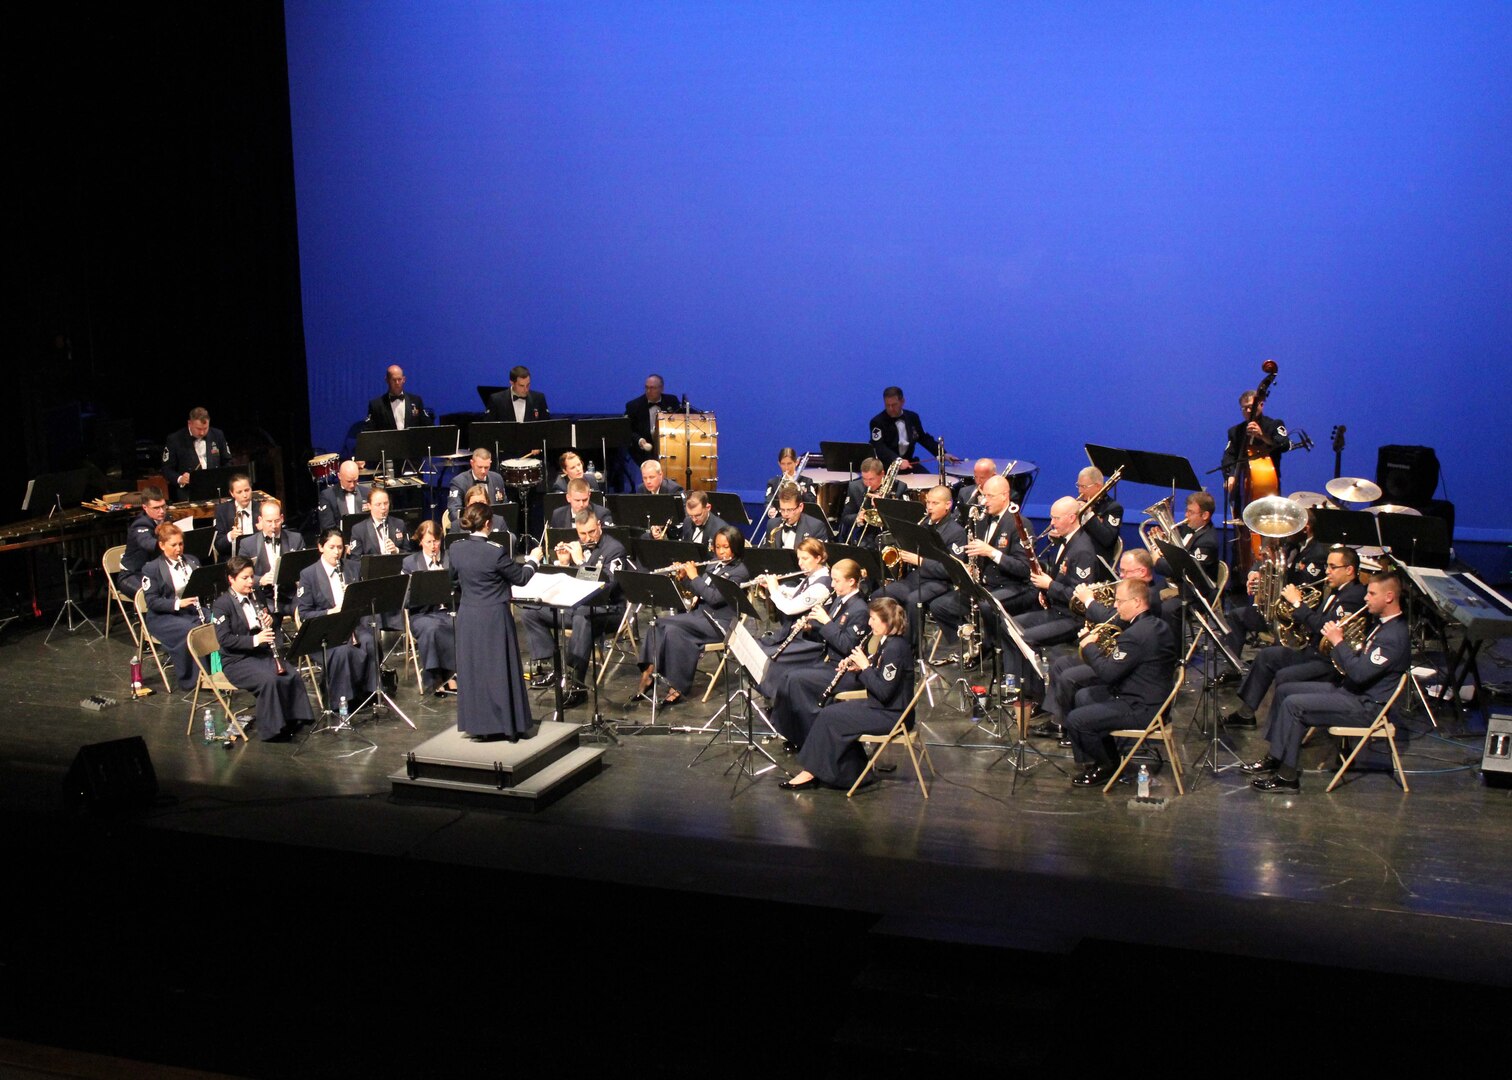 Holiday in Blue concerts to be held Dec. 10-11 at Laurie Auditorium > Joint Base San Antonio > News